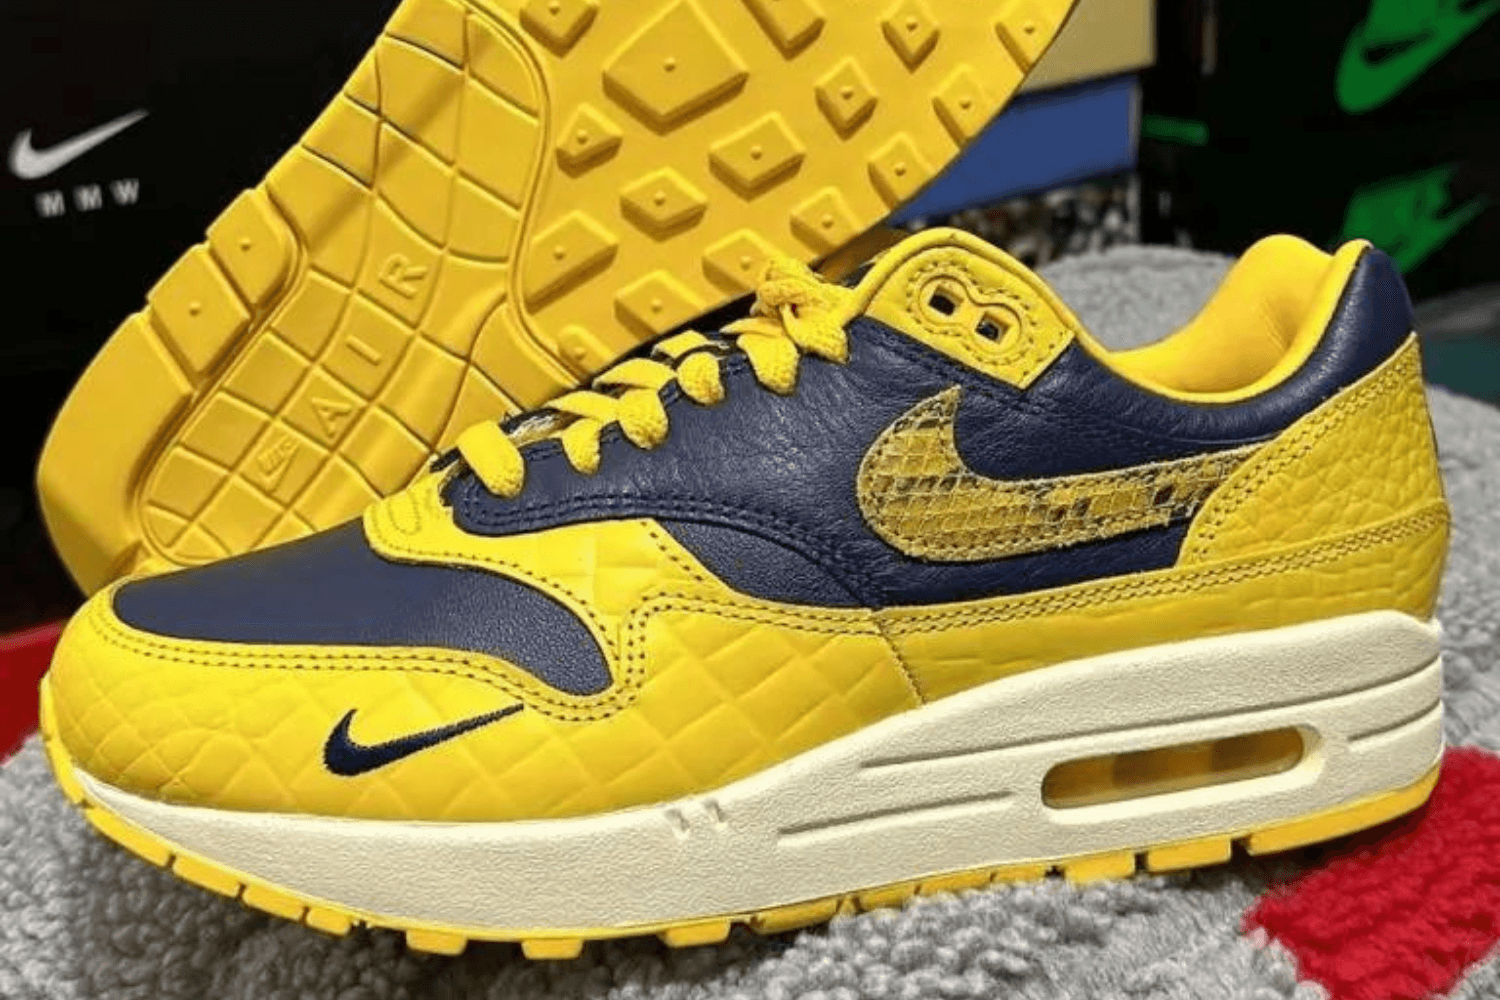 The Nike Air Max 1 PRM appears in a 'Michigan' colorway